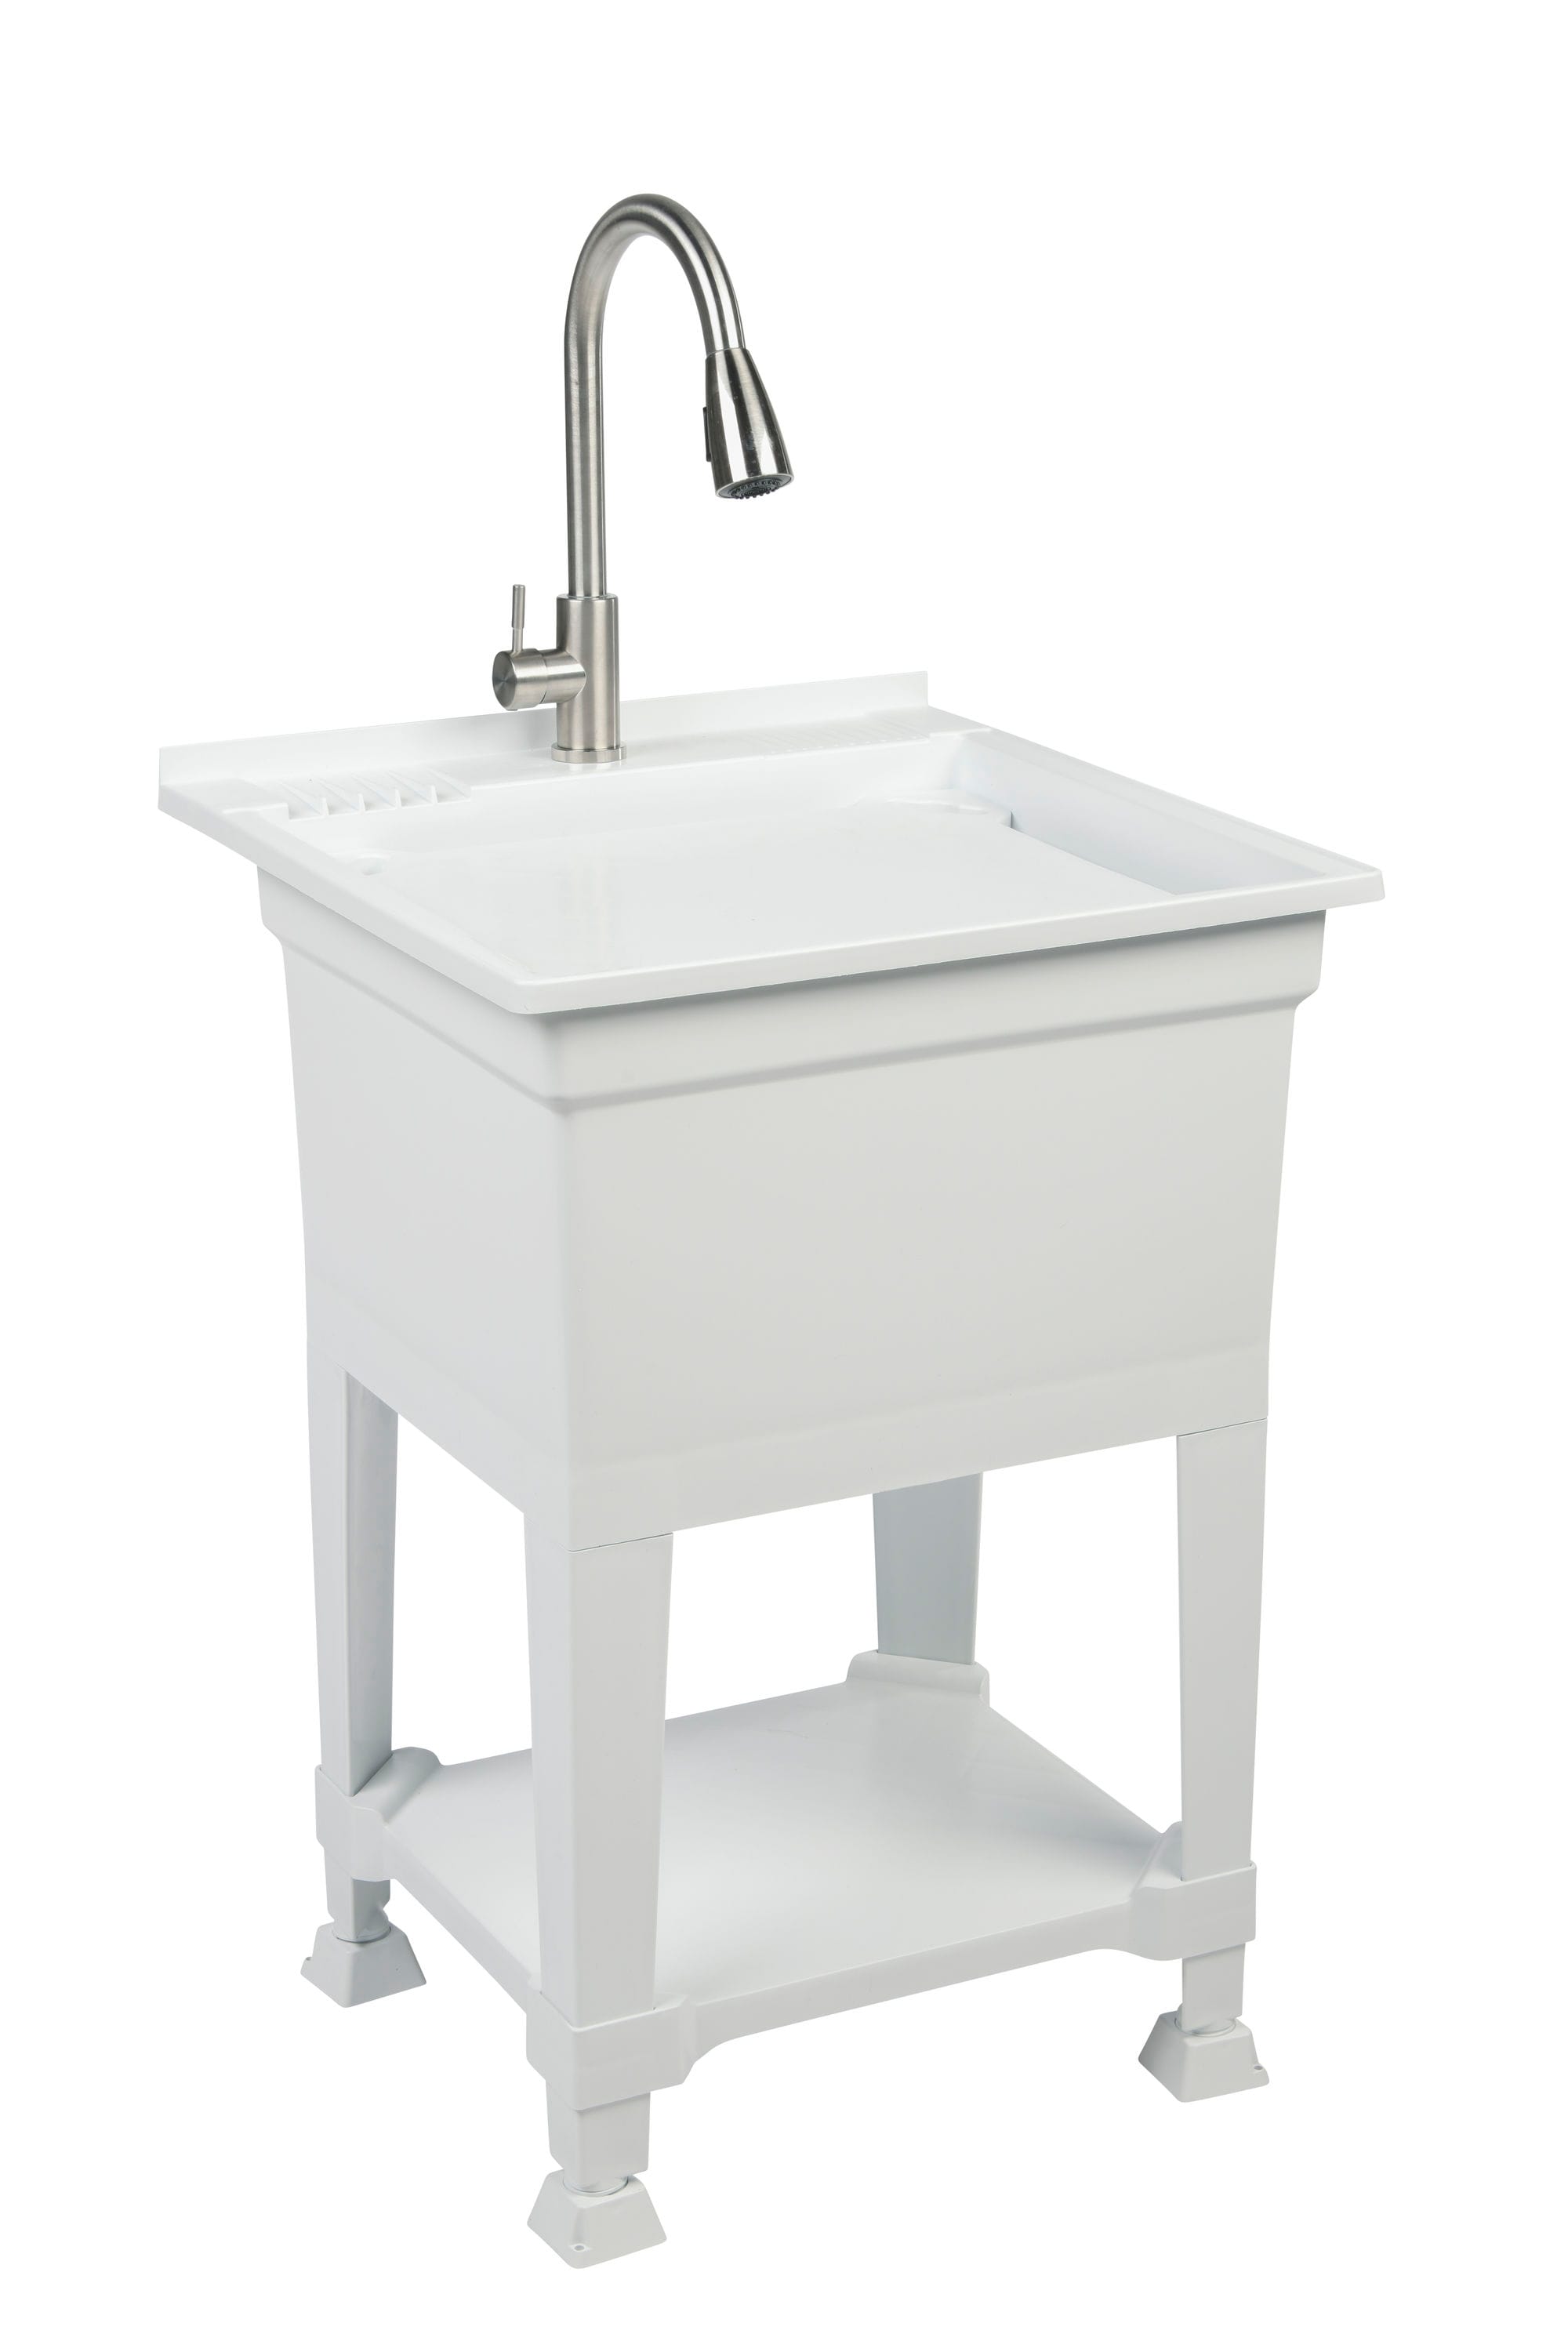 Stainless Steel Utility Sink Freestanding - Foter